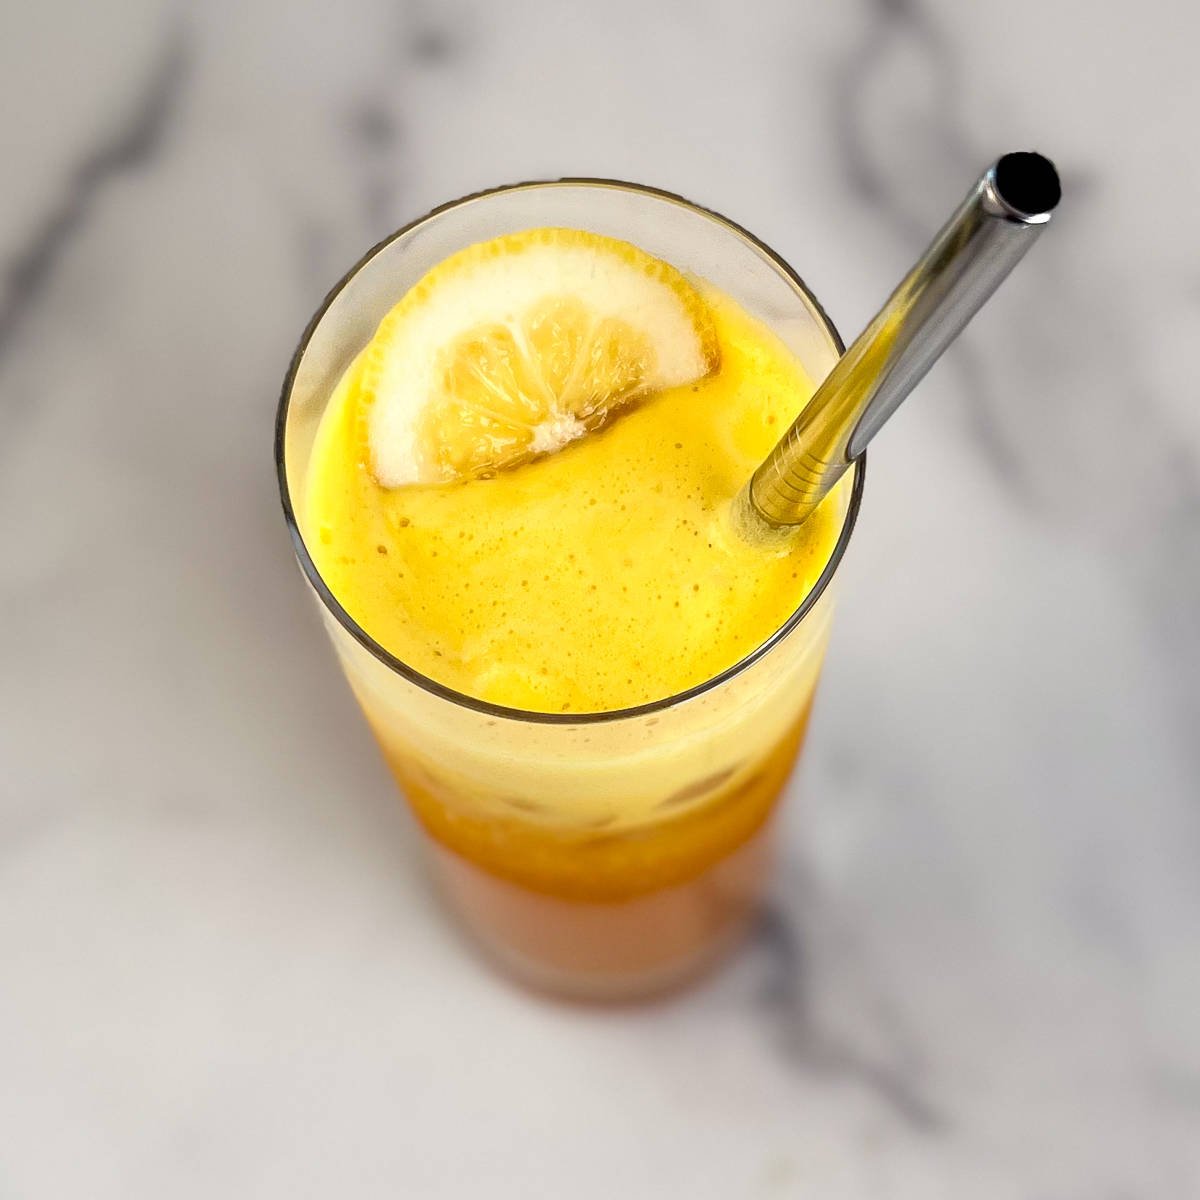 Glass of golden beet juice with slice of lemon on top and metal straw.